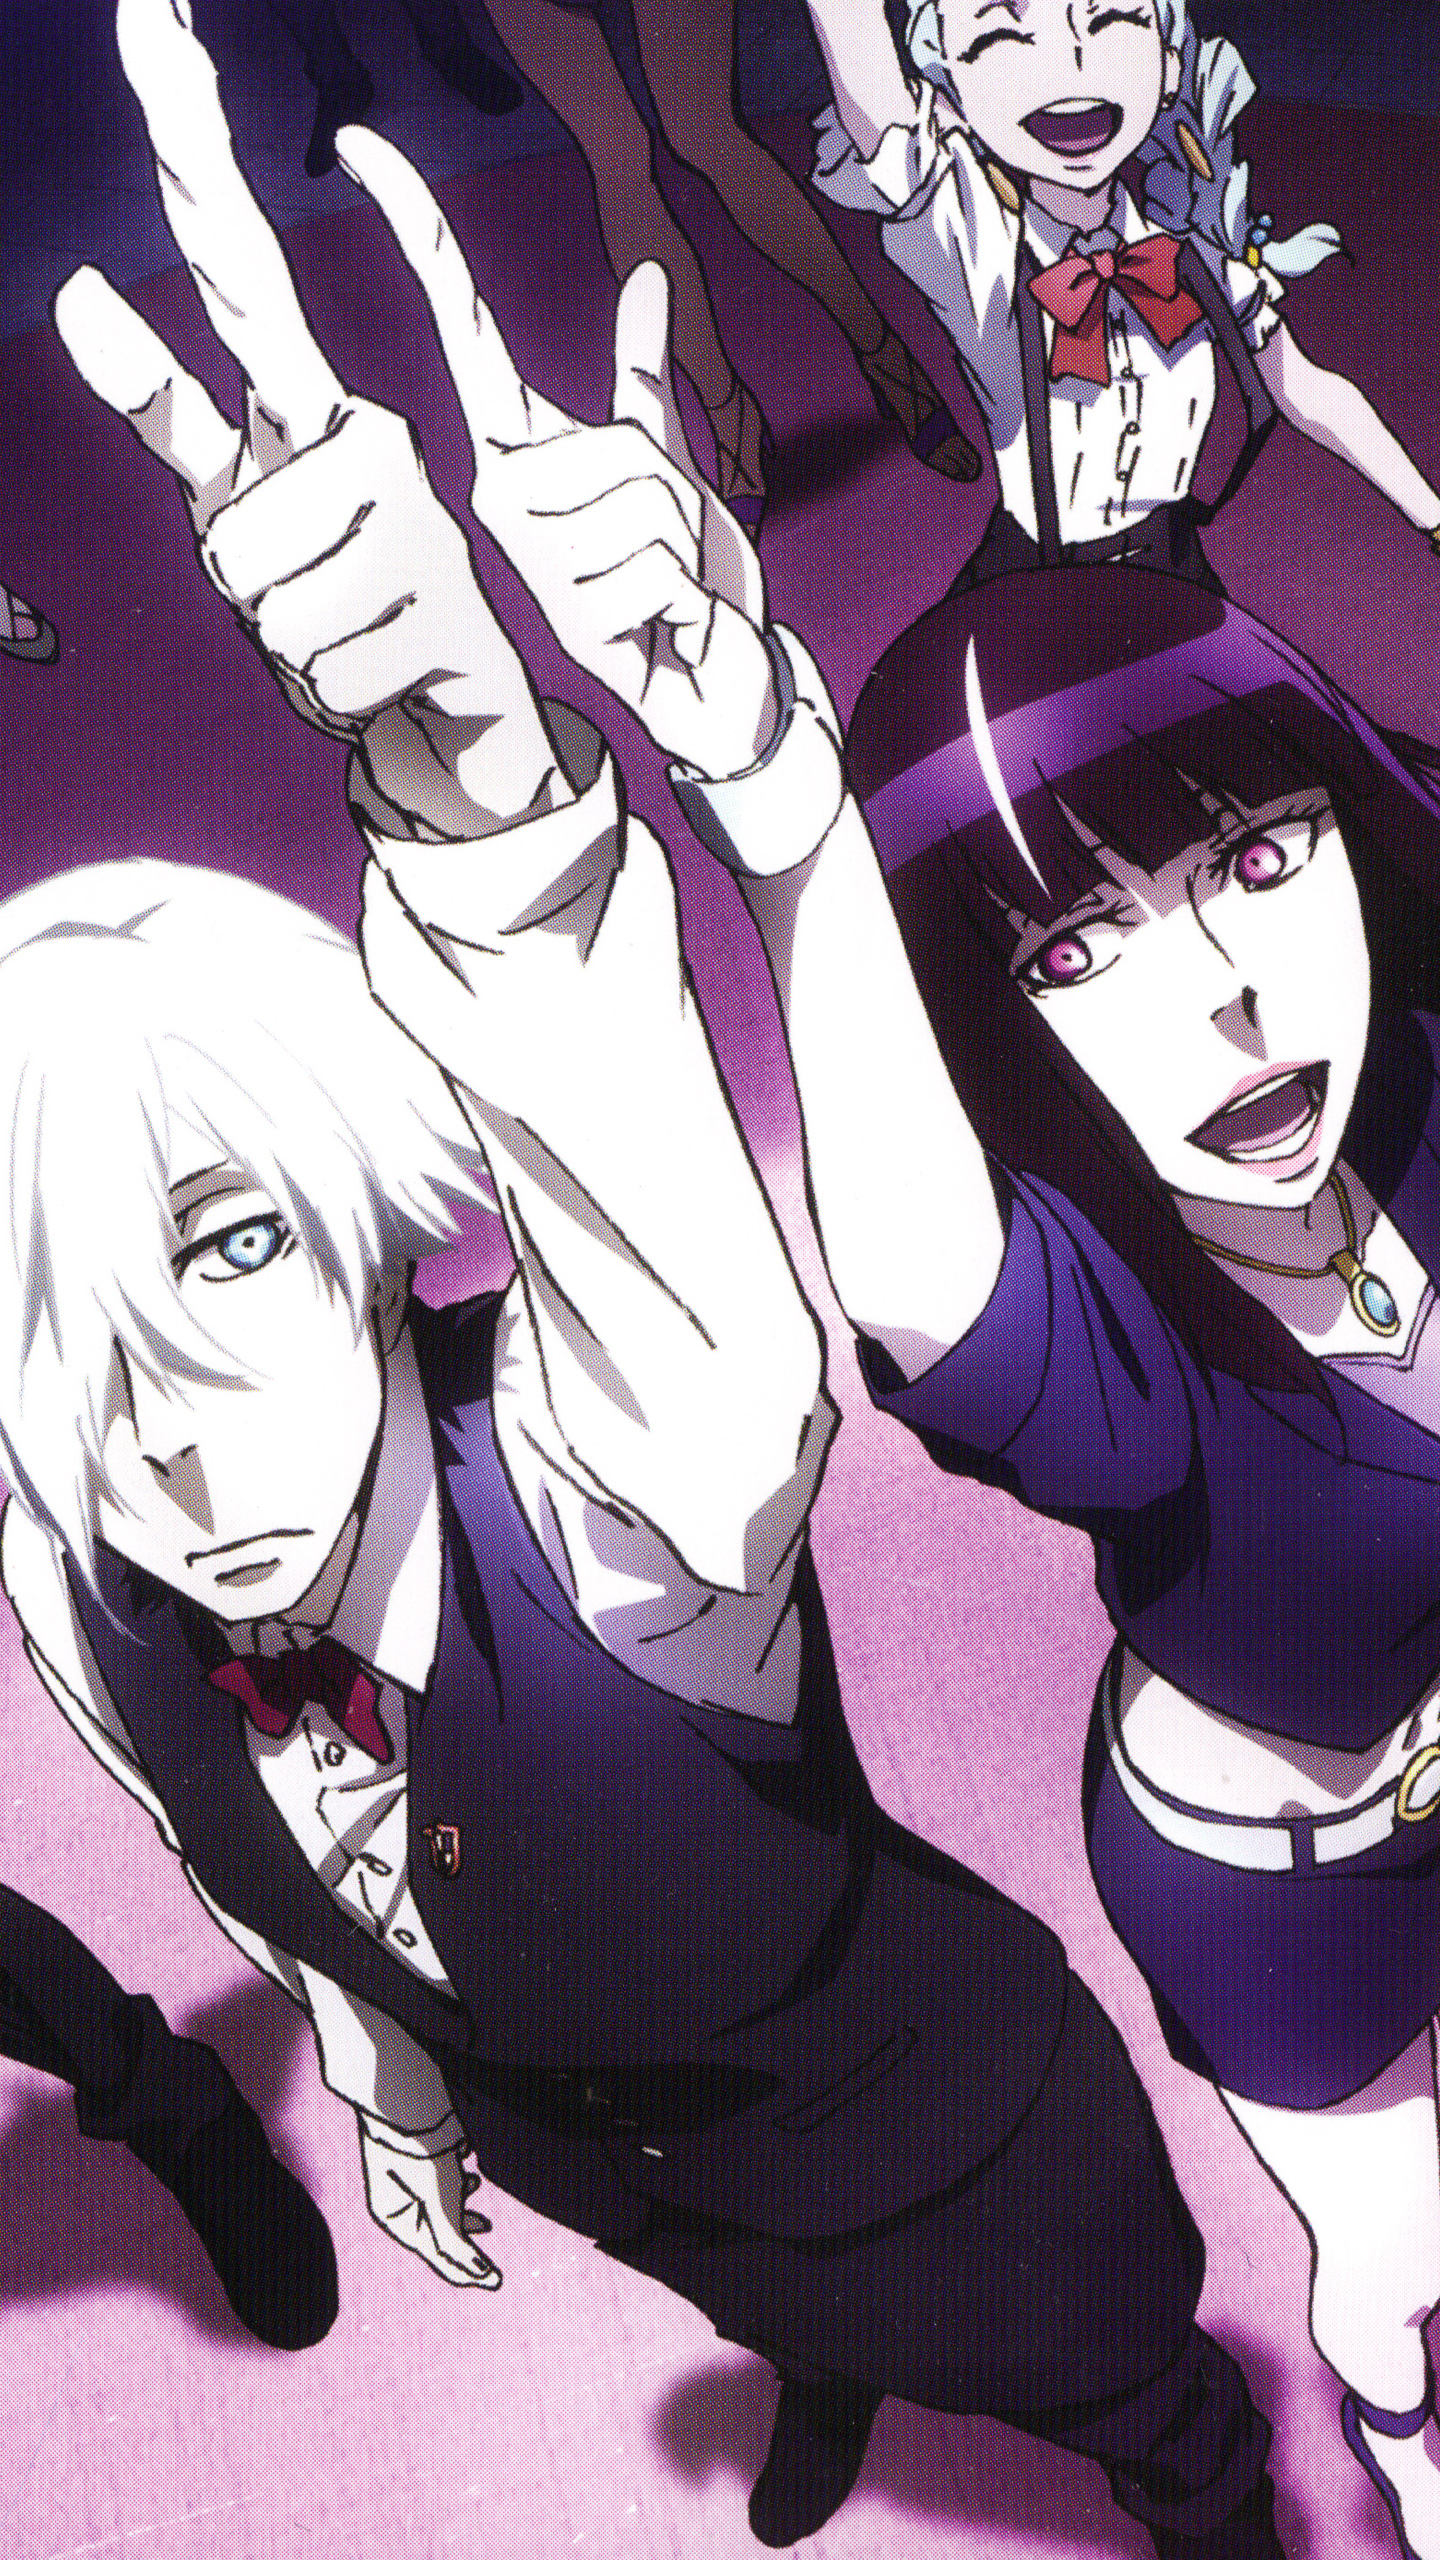 Death Parade – Opening Theme – Flyers 